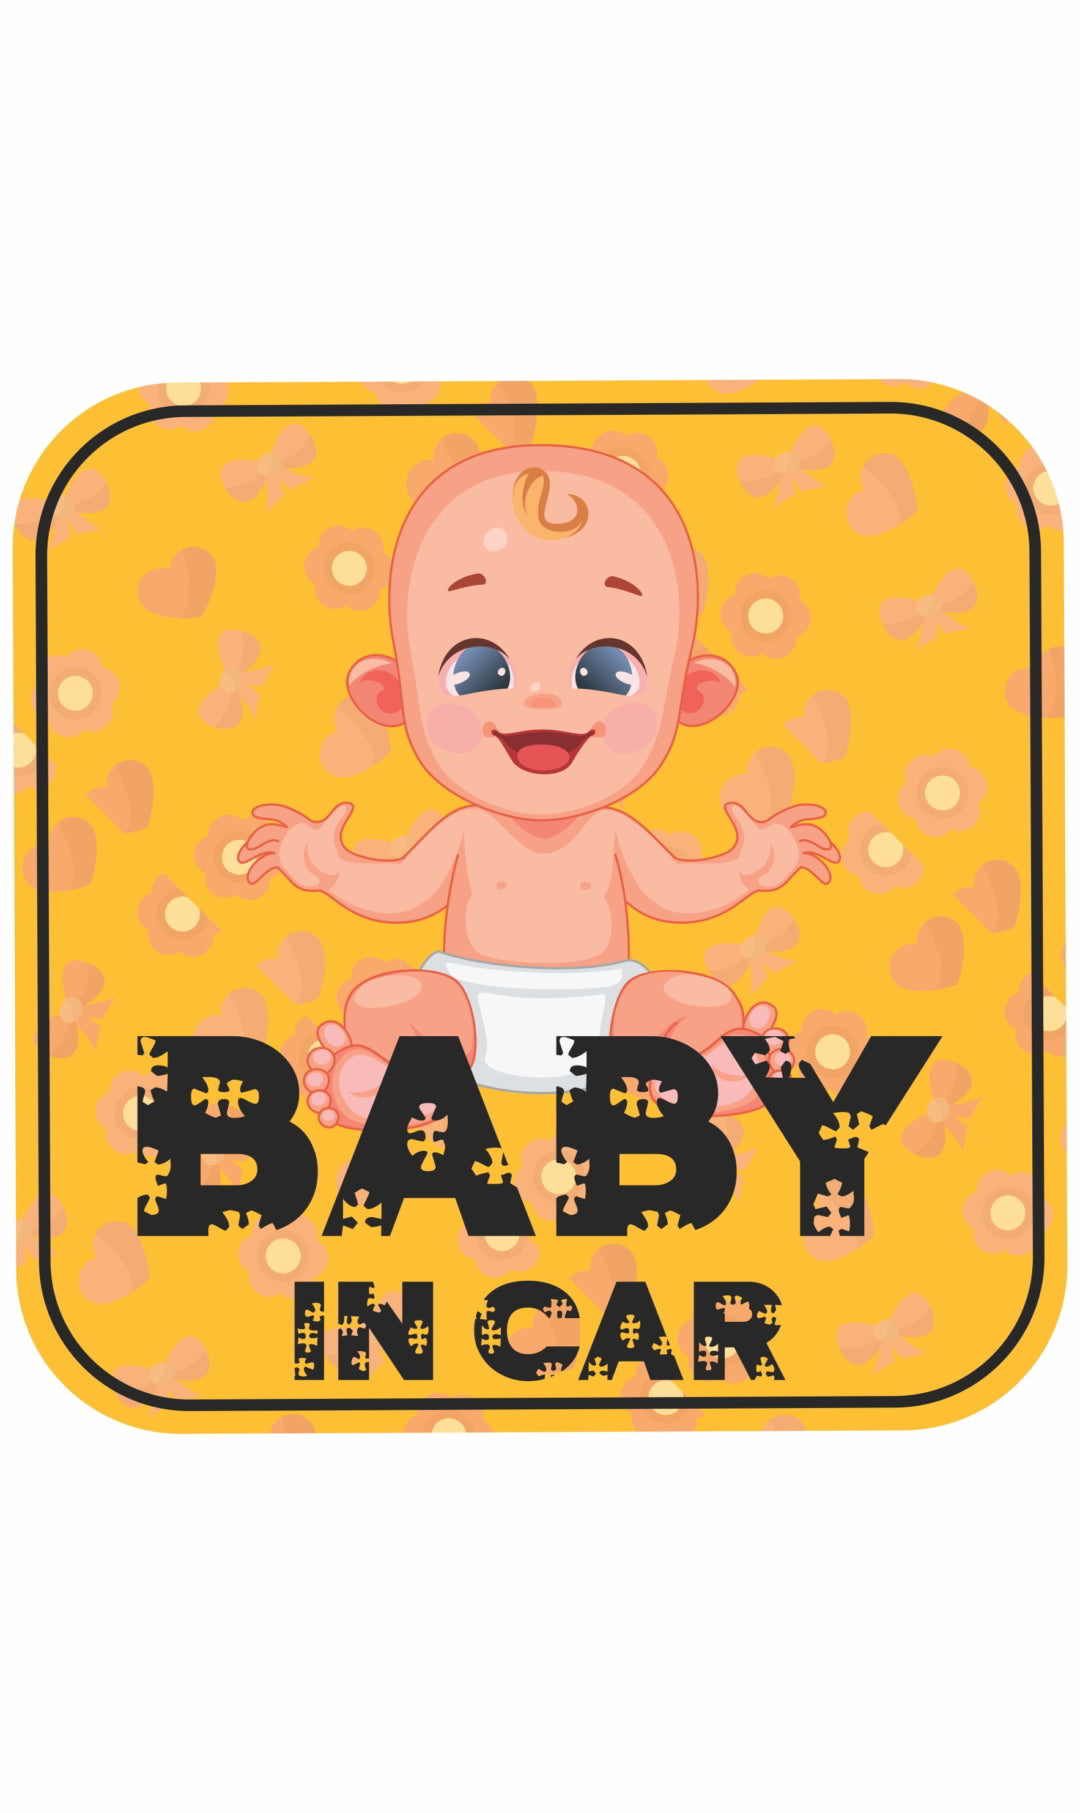 Baby in Car Decal Sticker(2pc)_c32